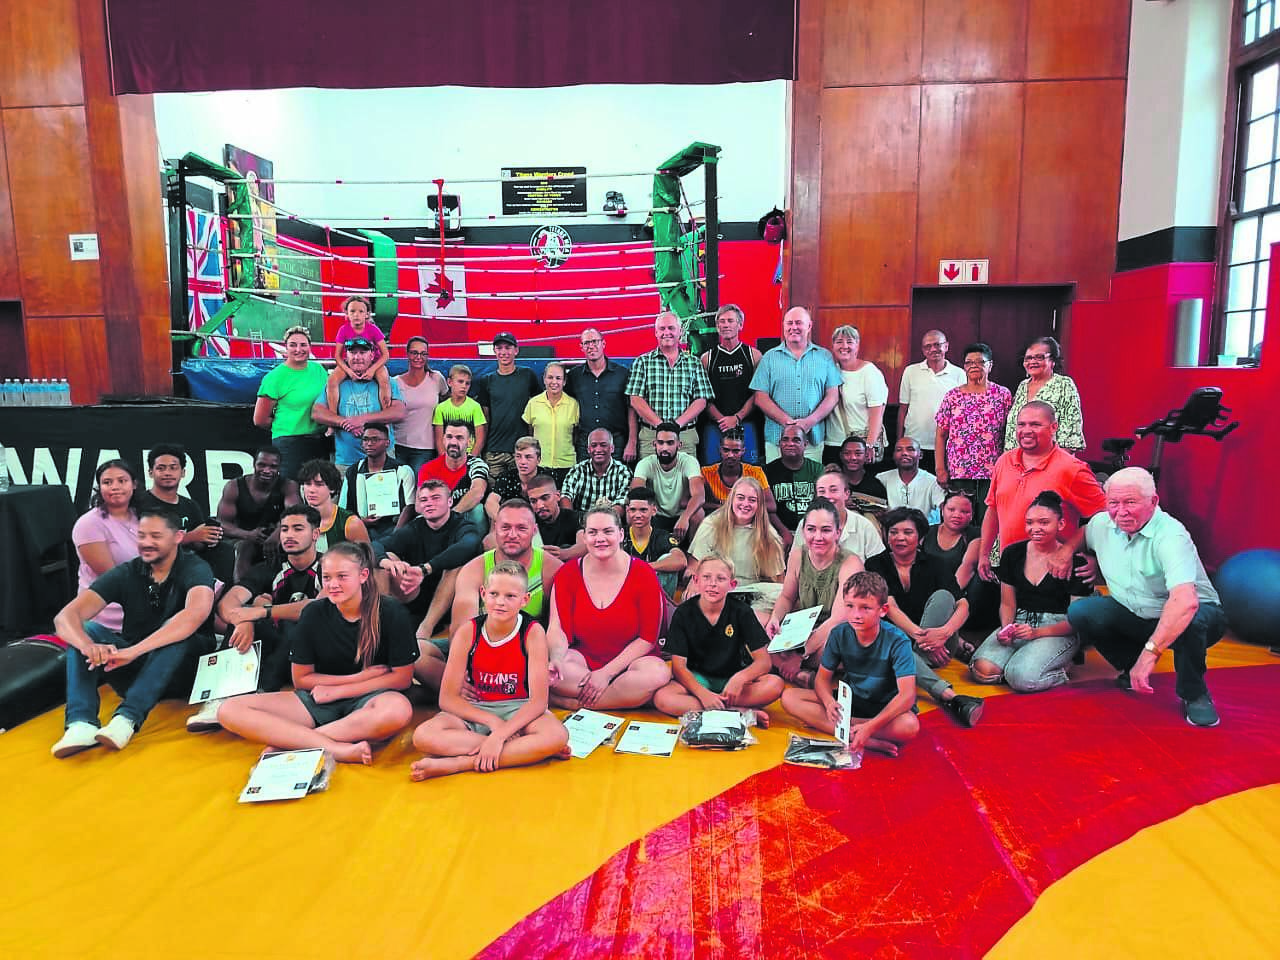 The Titan Kickboxing Academy in Synagogue Street, Paarl held its first Colours Award Ceremony of the Cape Winelands Kickboxing District (CWKA) recently. These athletes will now represent Cape Winelands in the Western Cape Kickboxing Championships in Cape Town. The team’s colours were awarded by Sports Council chair Lorenzo Arendse.